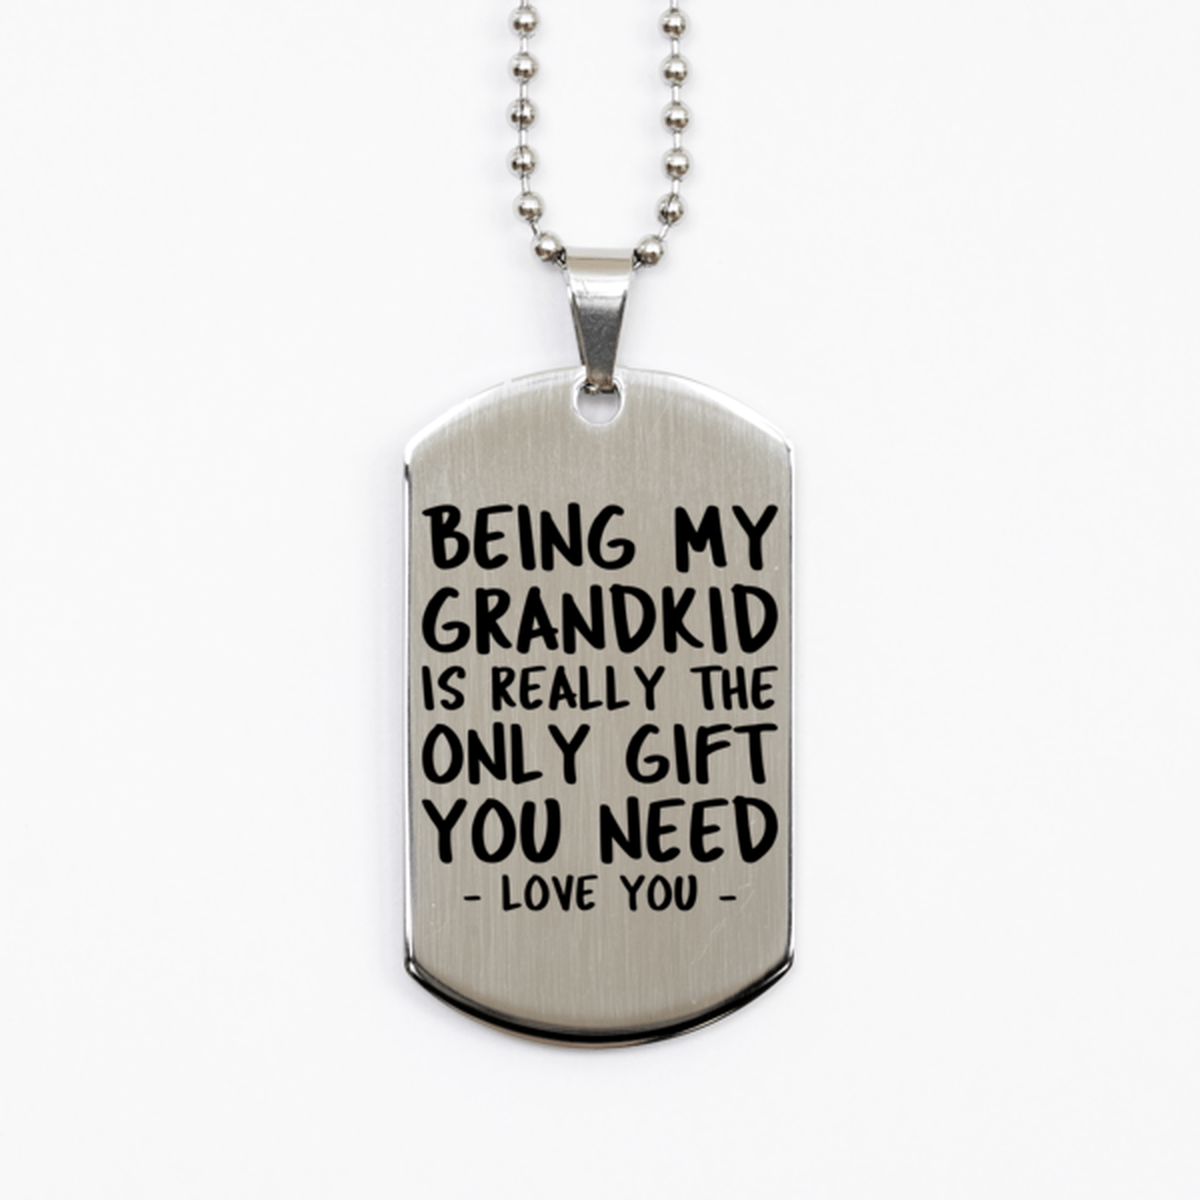 Funny Grandkid Silver Dog Tag Necklace, Being My Grandkid Is Really the Only Gift You Need, Best Birthday Gifts for Grandkid